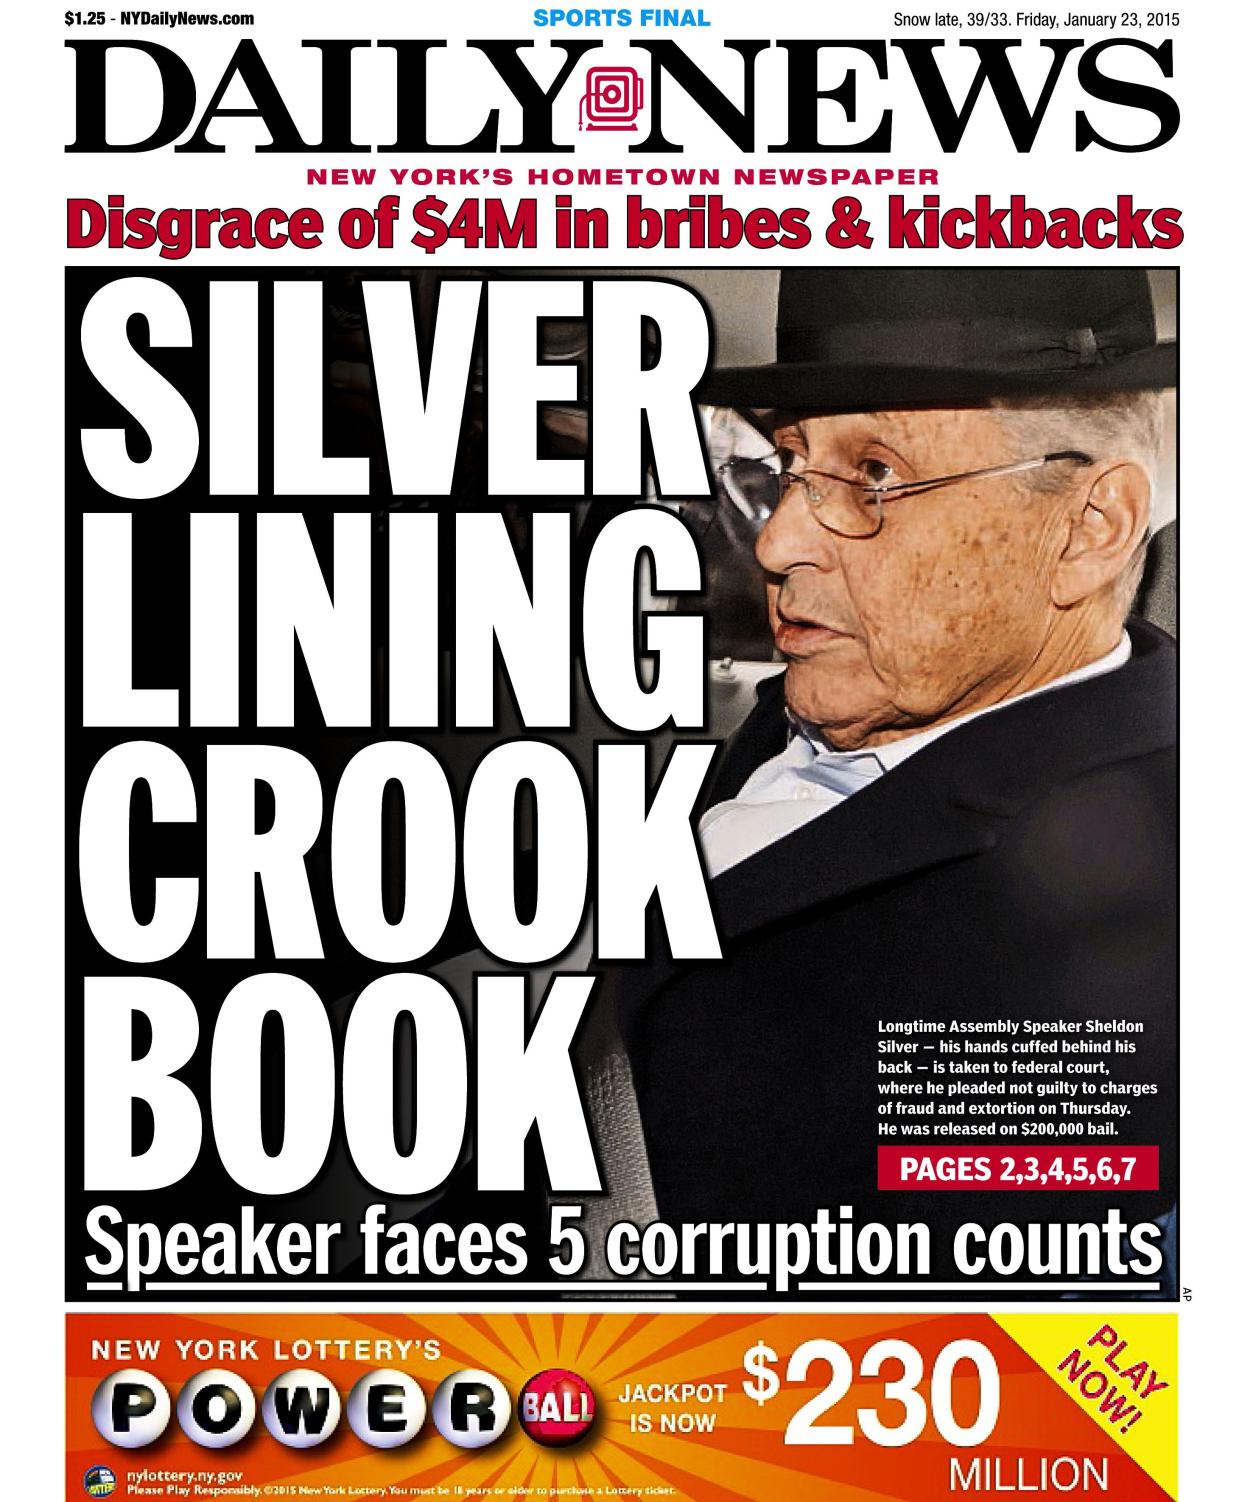 Front page of the New York Daily News for Jan. 23, 2015, about the arrest of Sheldon Silver for corruption and kickbacks: SILVER LINING CROOK BOOK